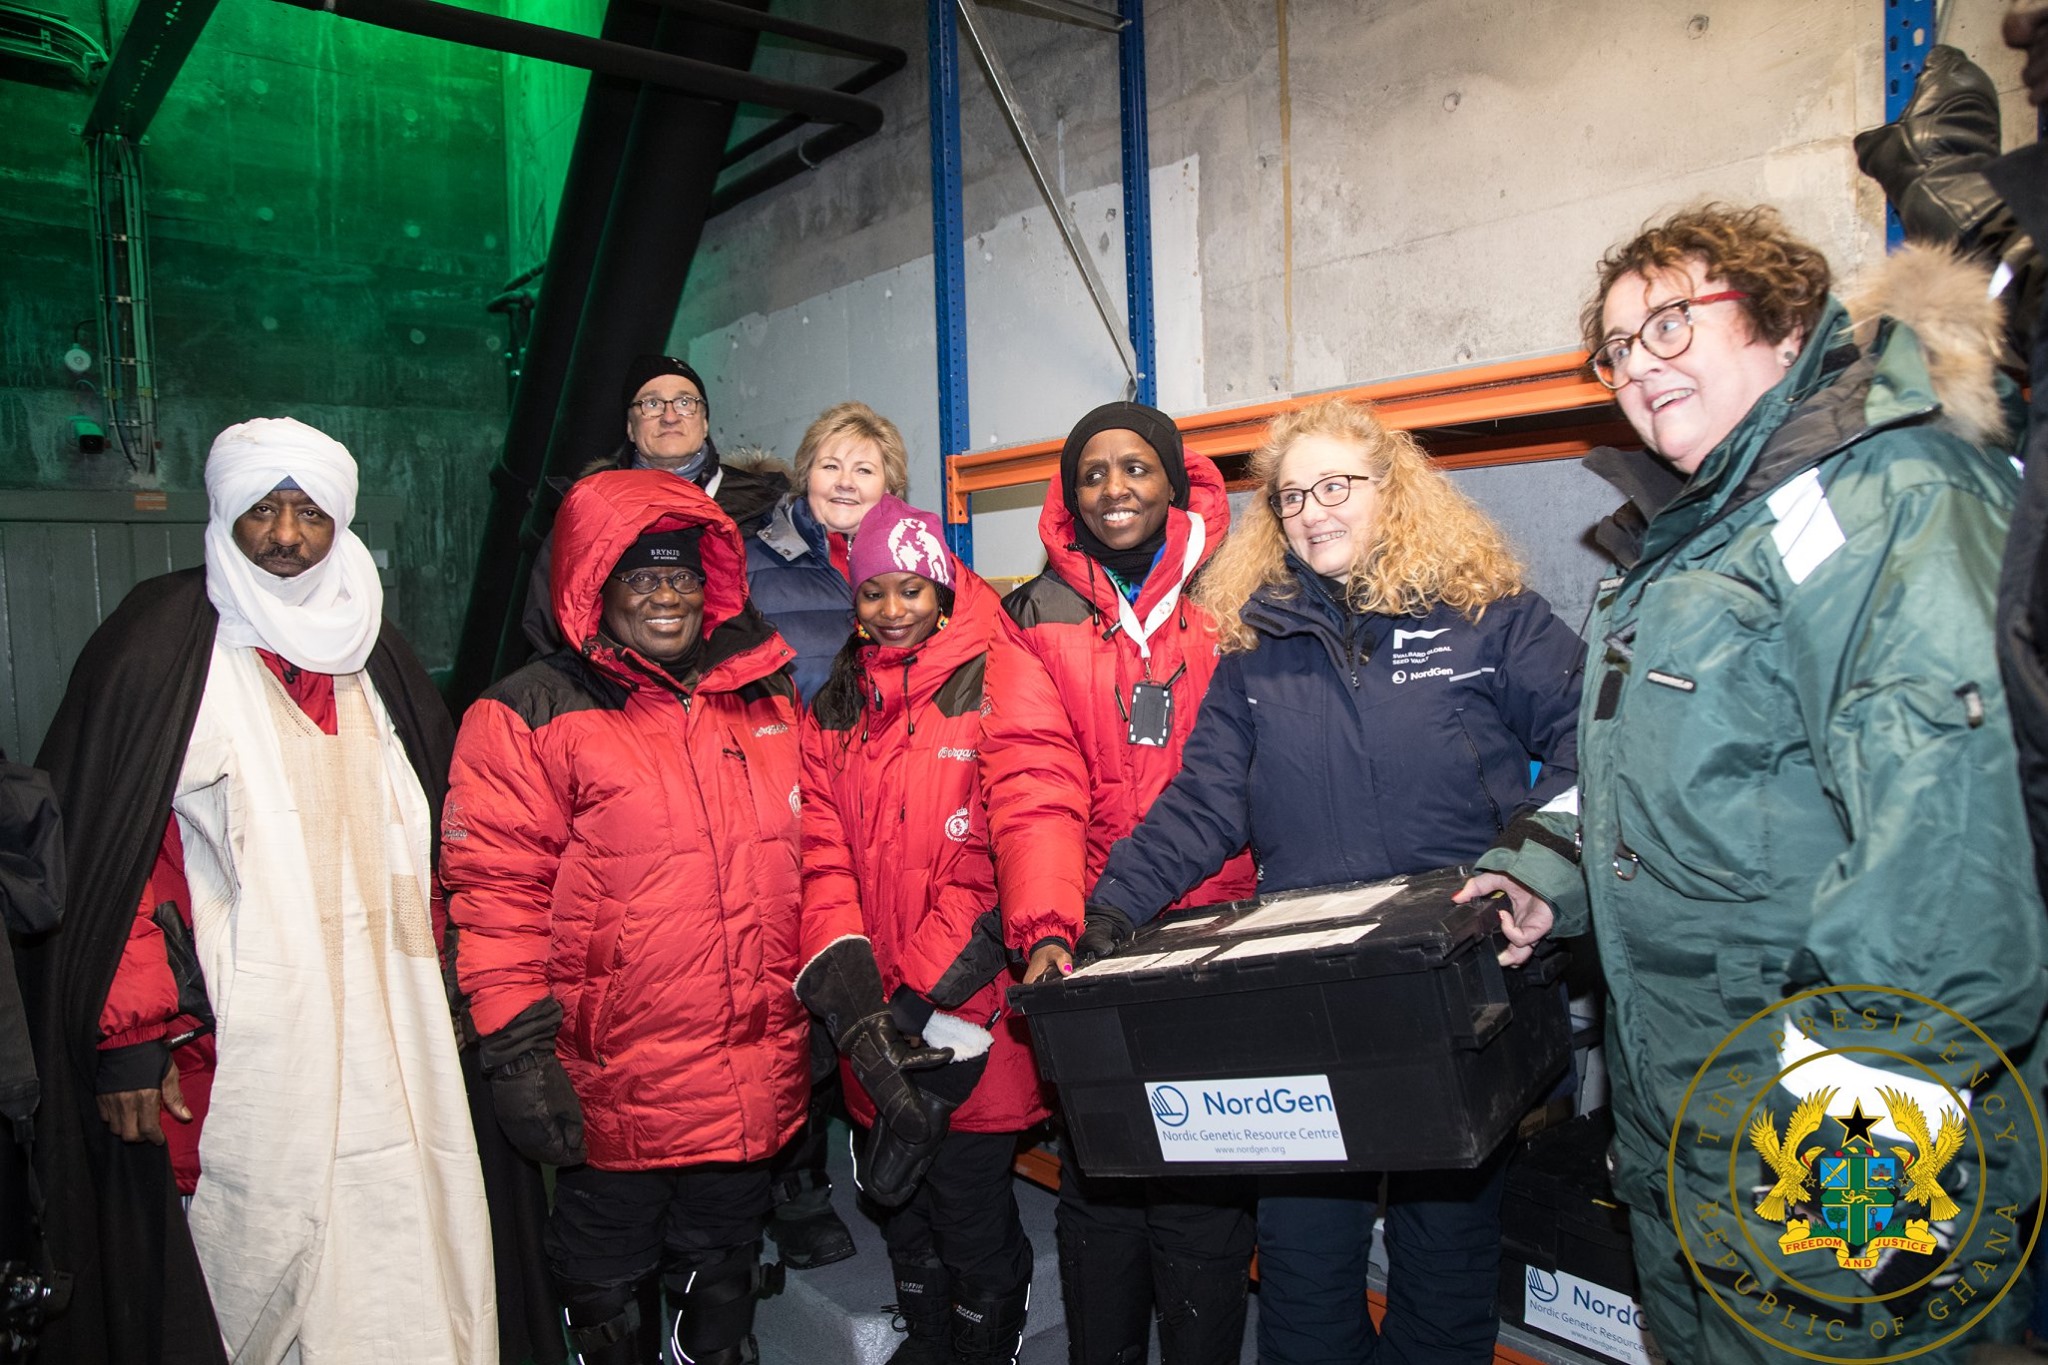 Nana Addo ‘cools off’ as he visits Norway’s seed vault near North Pole [Photos]